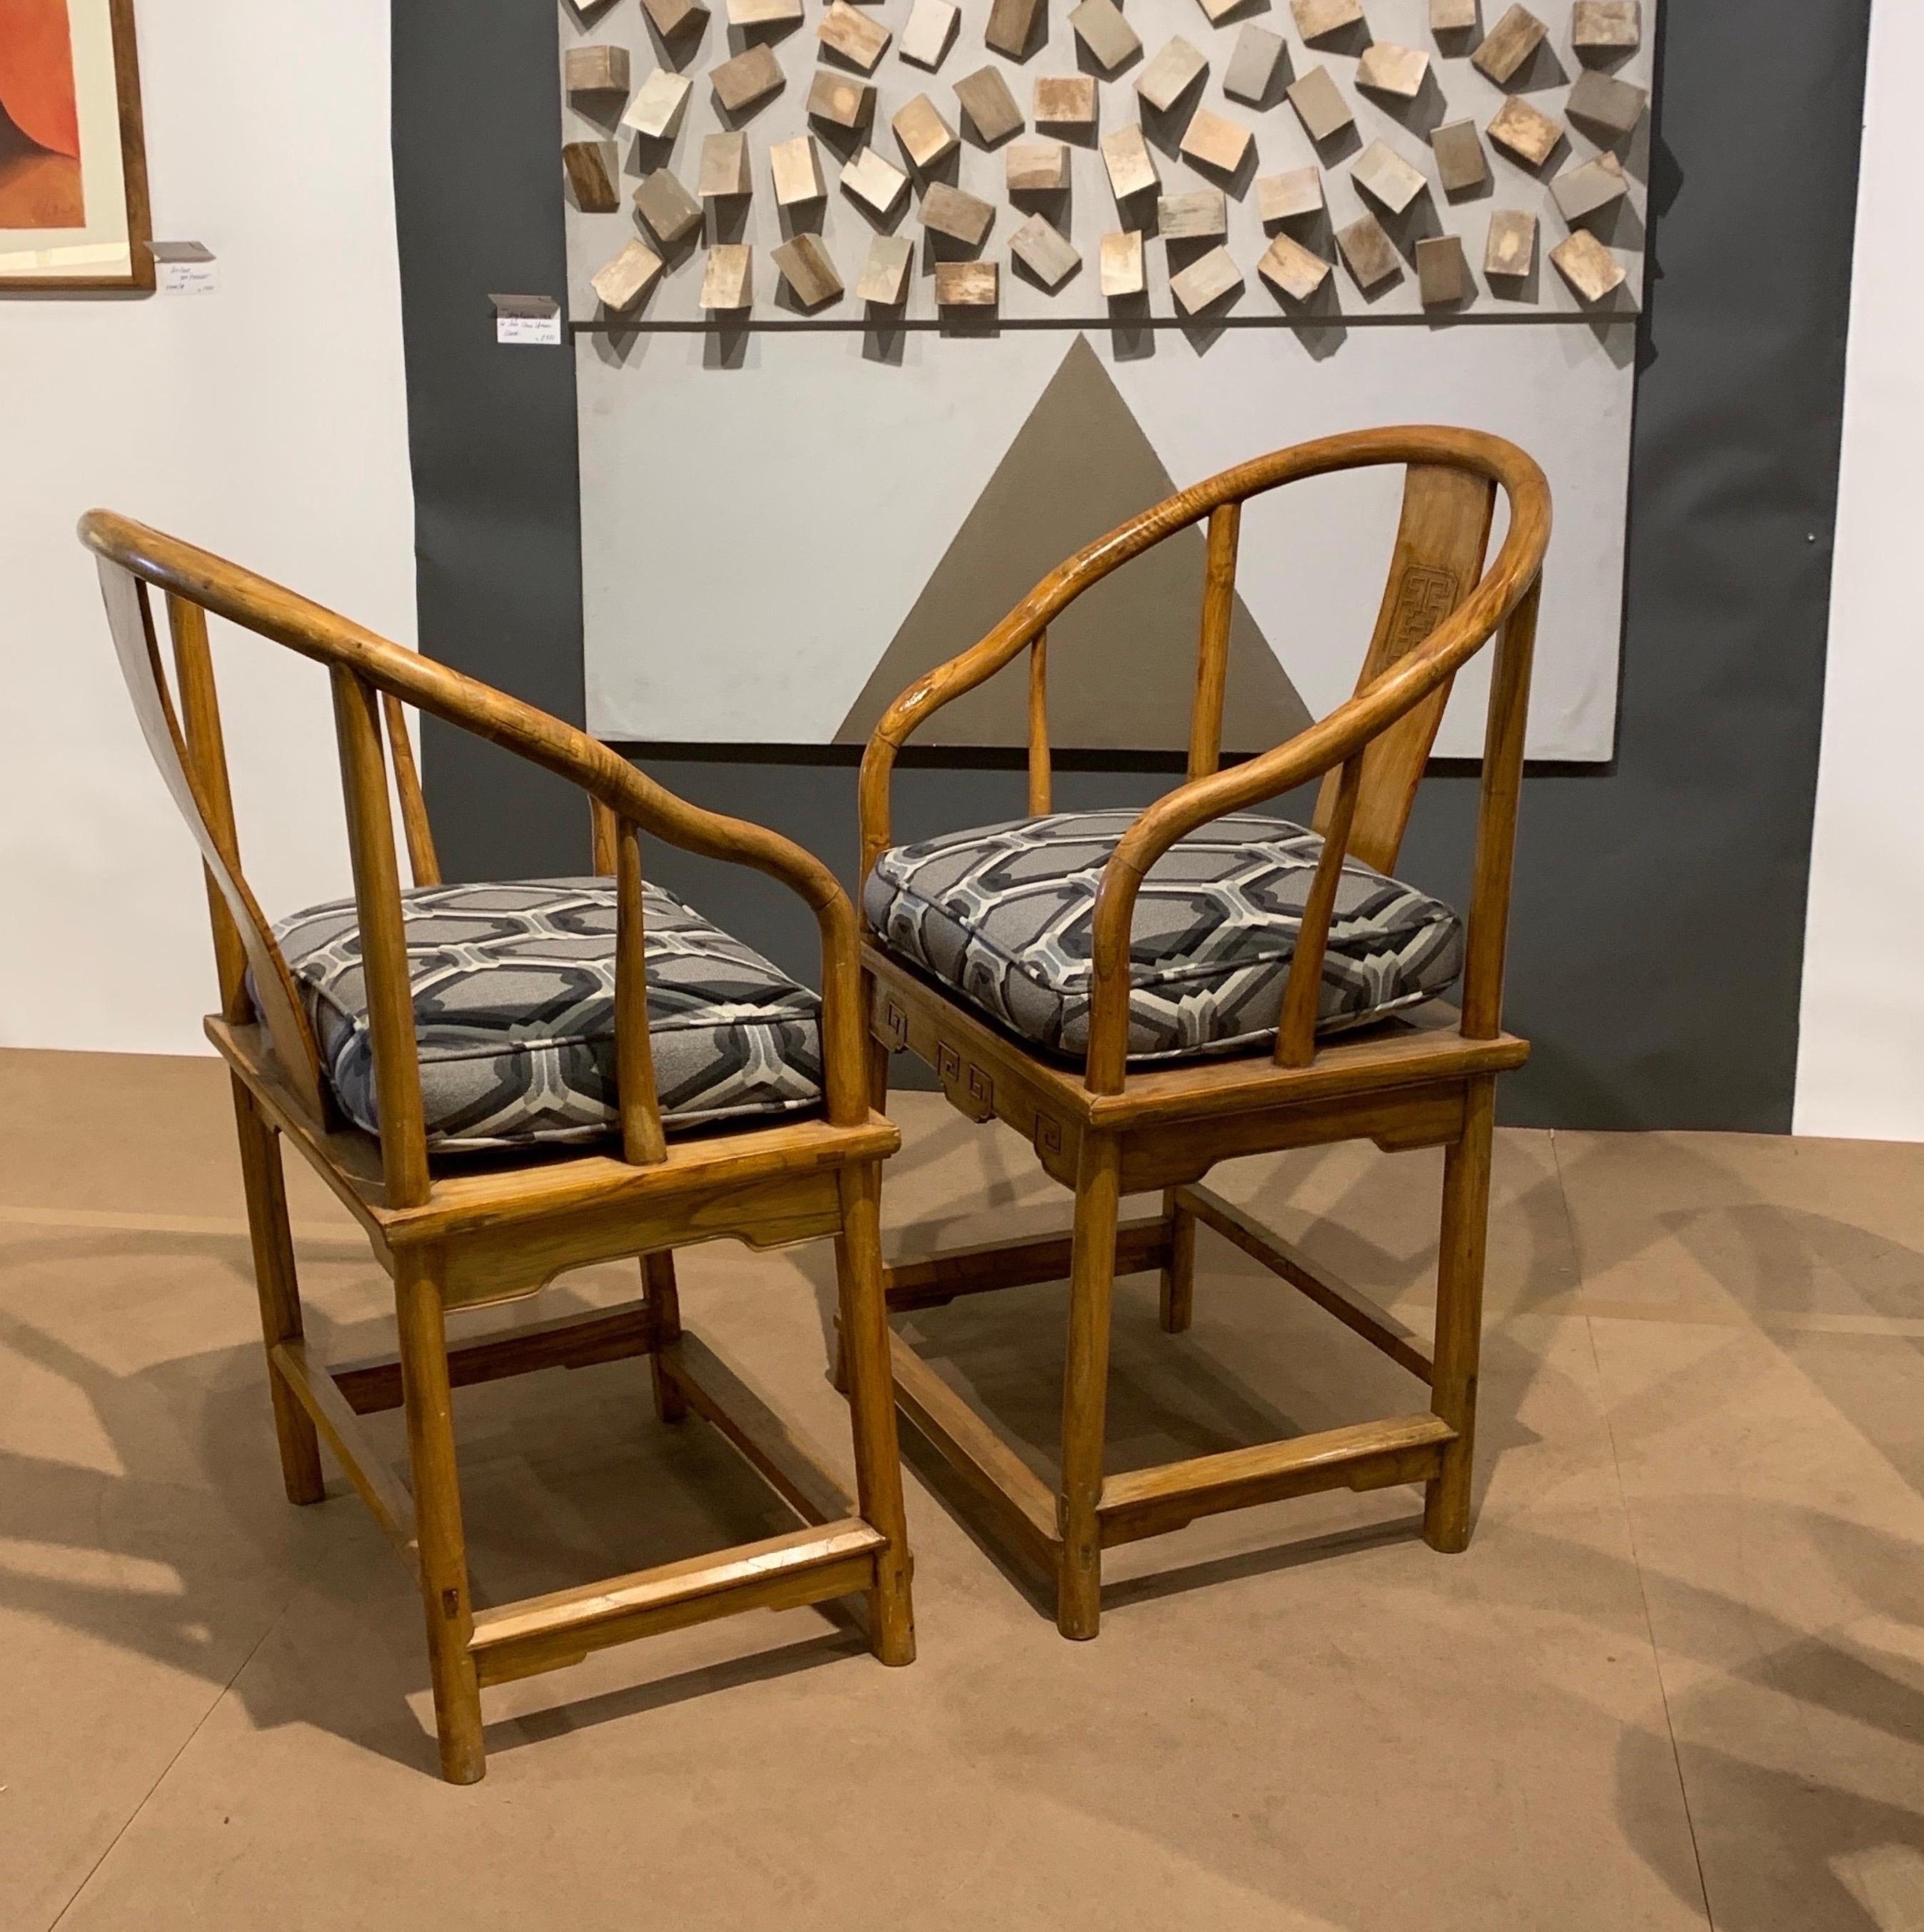 Pair of Vintage Modern Ming Horseshoe Chairs with Geometric Cushions In Good Condition For Sale In Palm Springs, CA